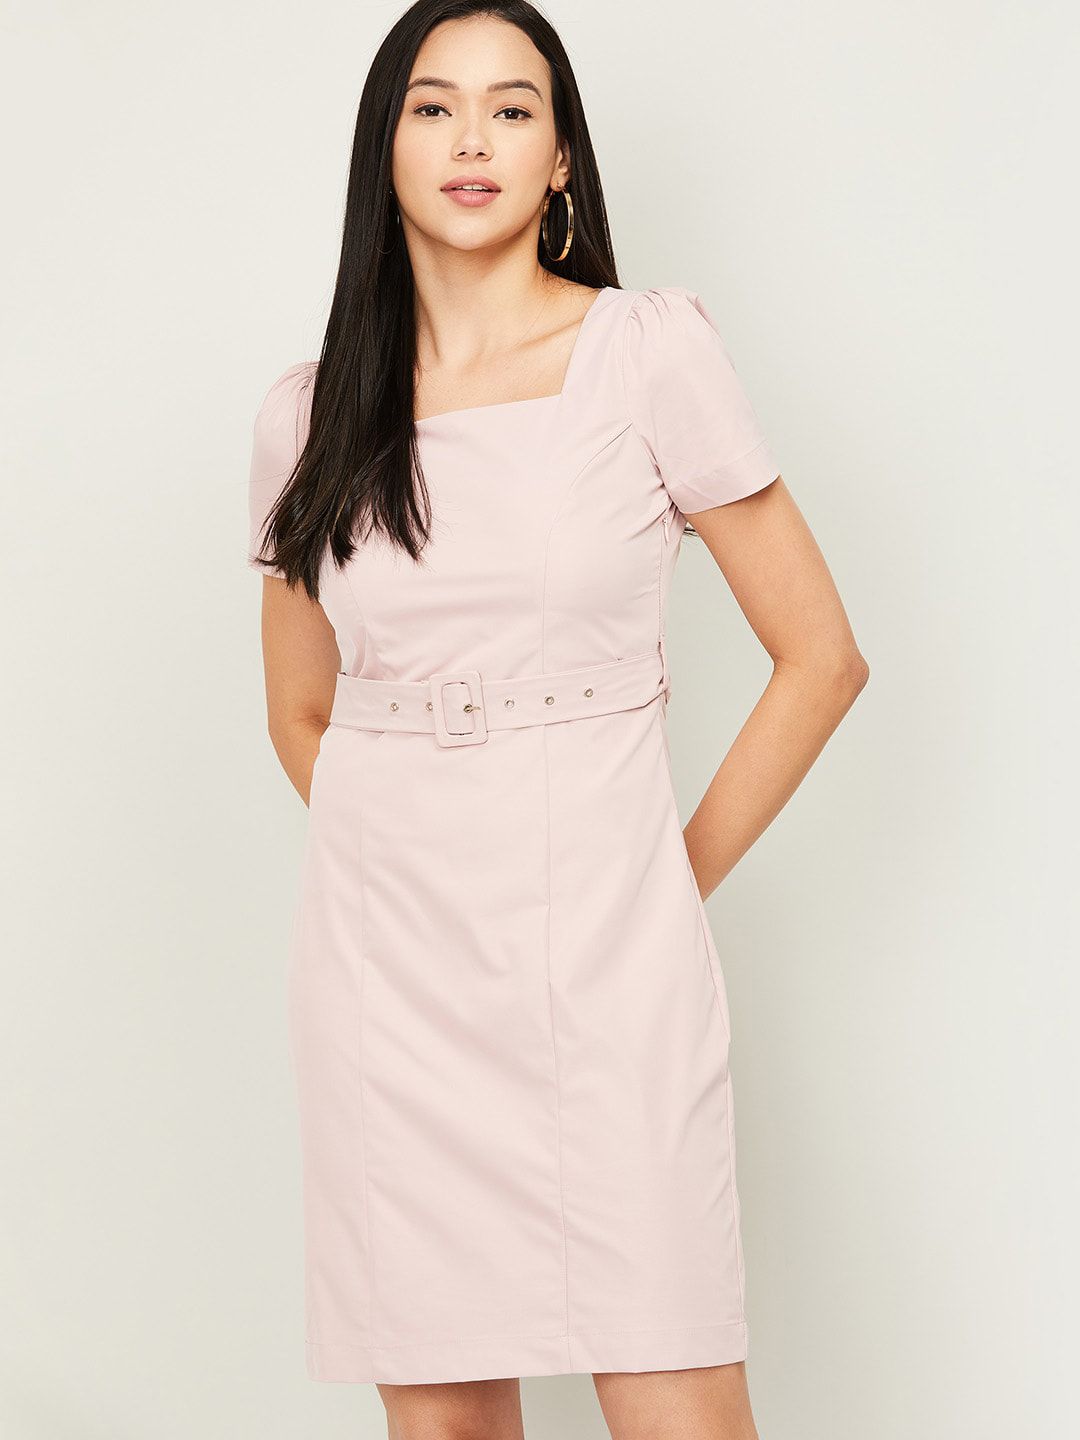 CODE by Lifestyle Pink Solid Sheath Dress Price in India